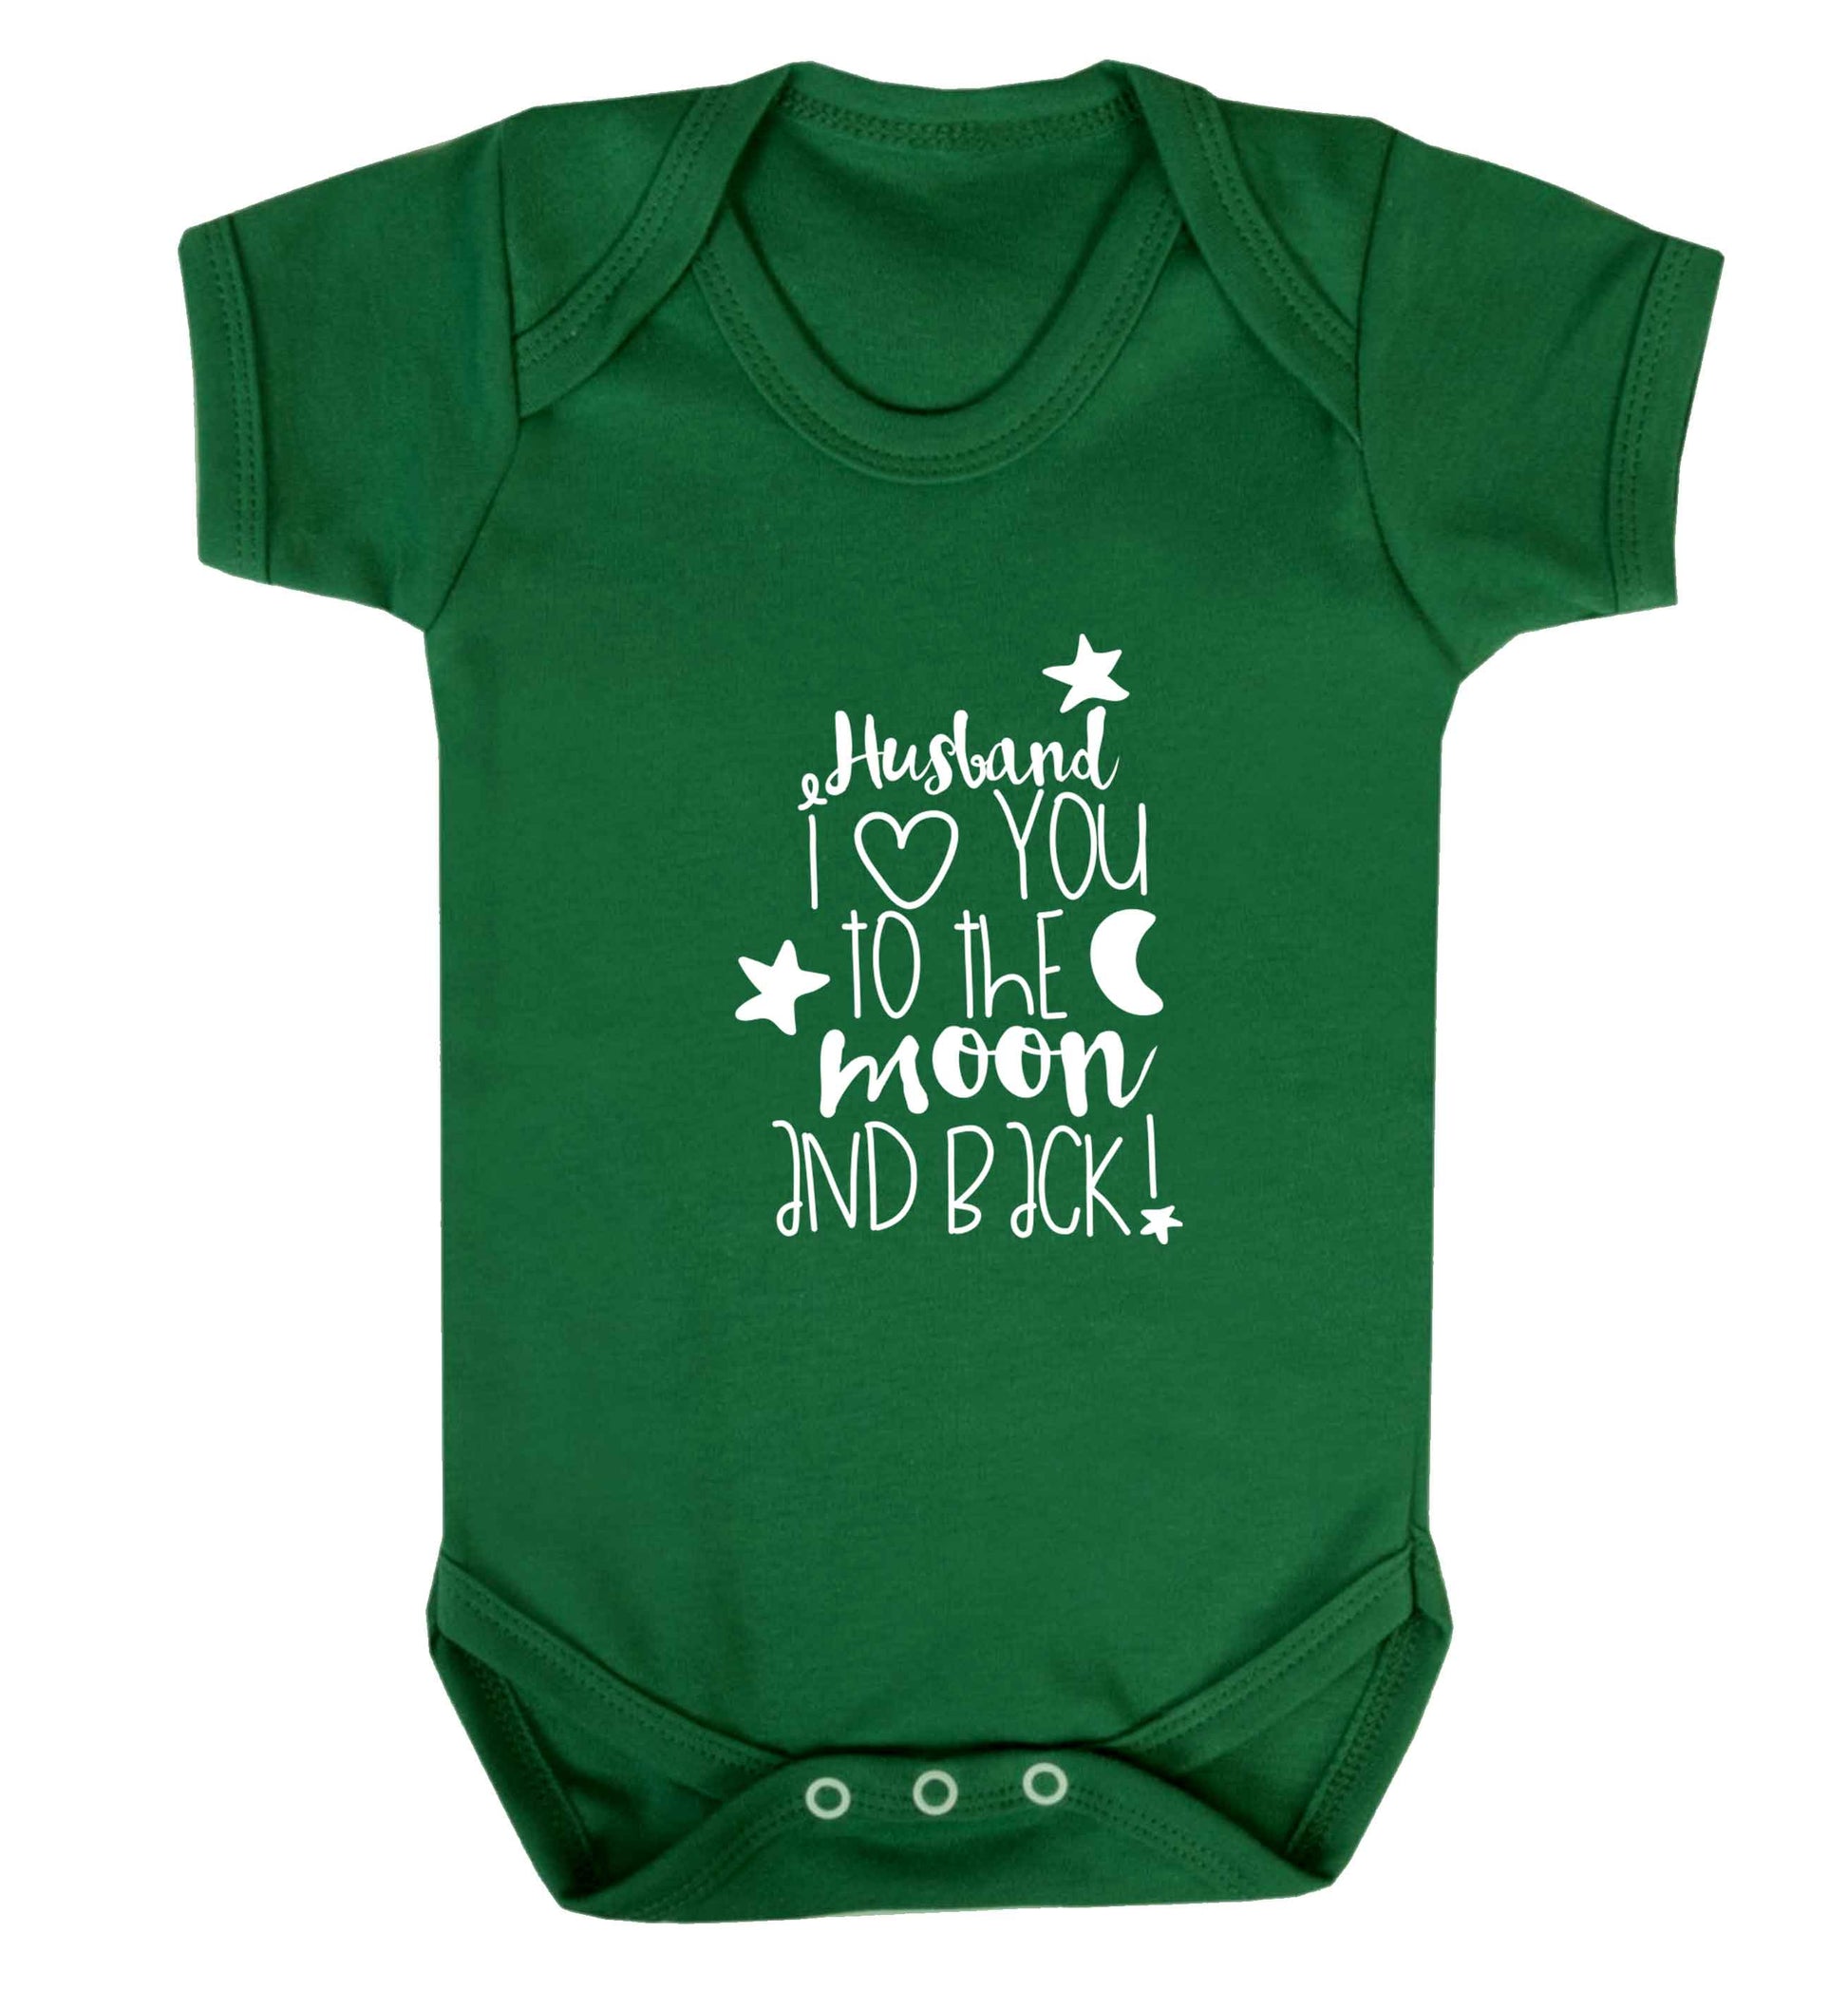 Husband I love you to the moon and back baby vest green 18-24 months